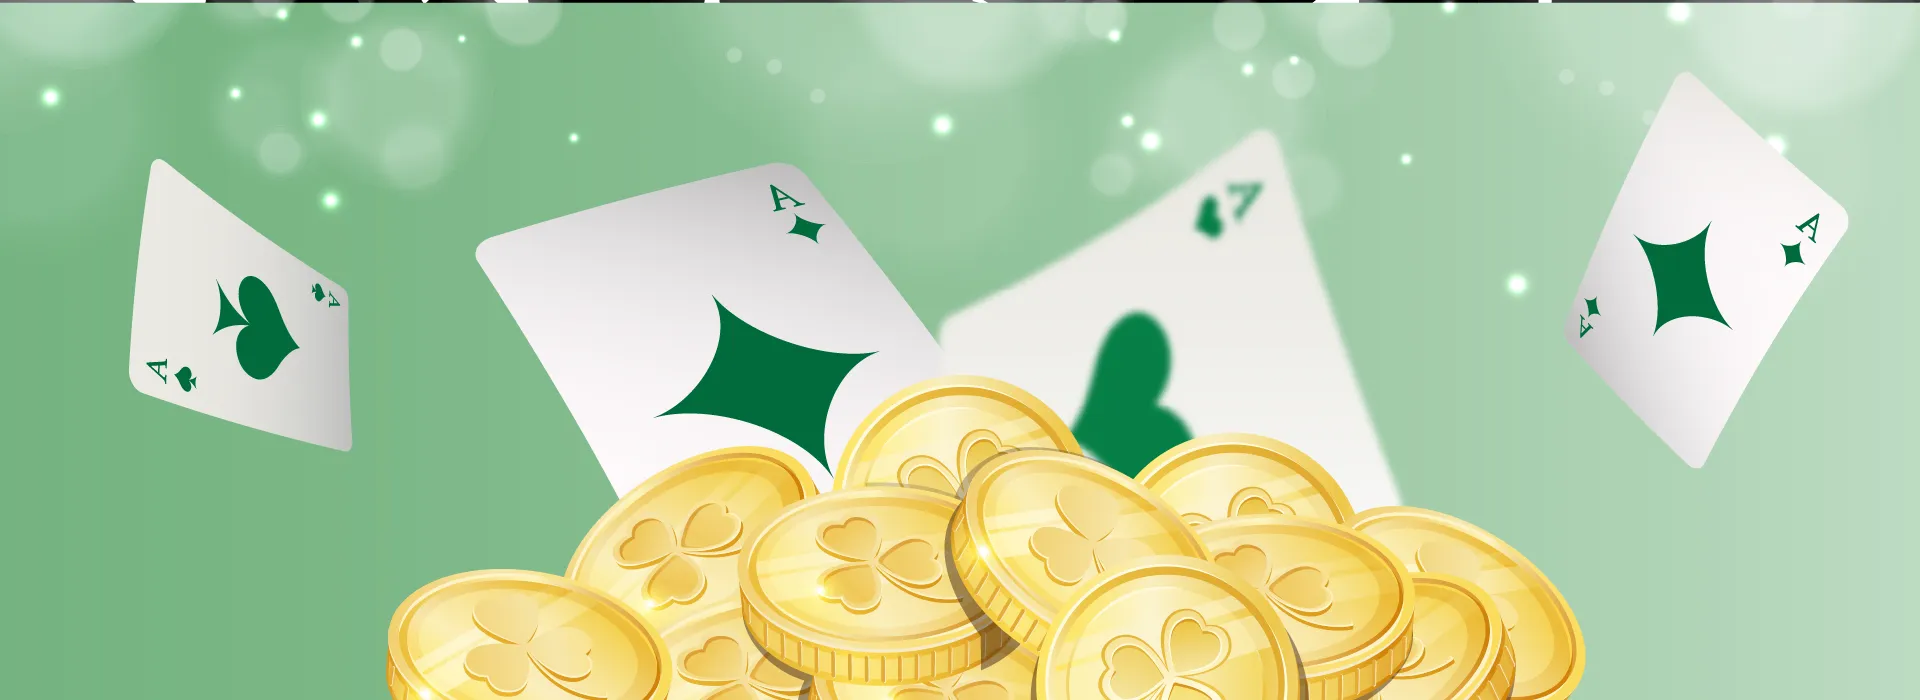 image of golden coins in front of white and green aces